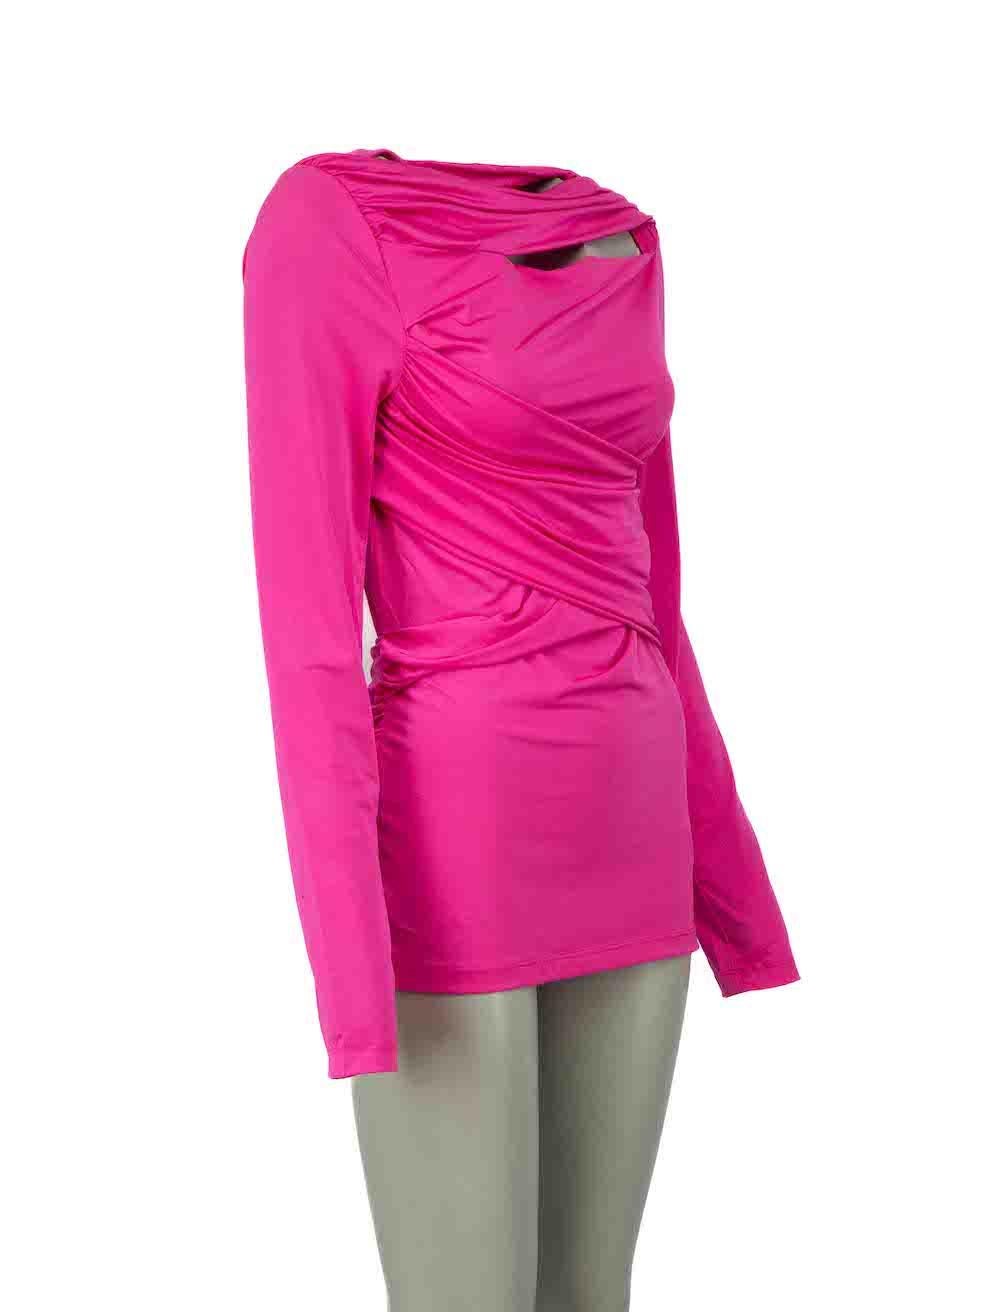 CONDITION is Very good. Hardly any visible wear to top is evident on this used Victoria Beckham designer resale item.
 
Details
Pink
Polyester
Top
Long sleeves
Ruched
Drape detail
 
Made in Portugal
 
Composition
94% Polyester, 6% Elastane
Care